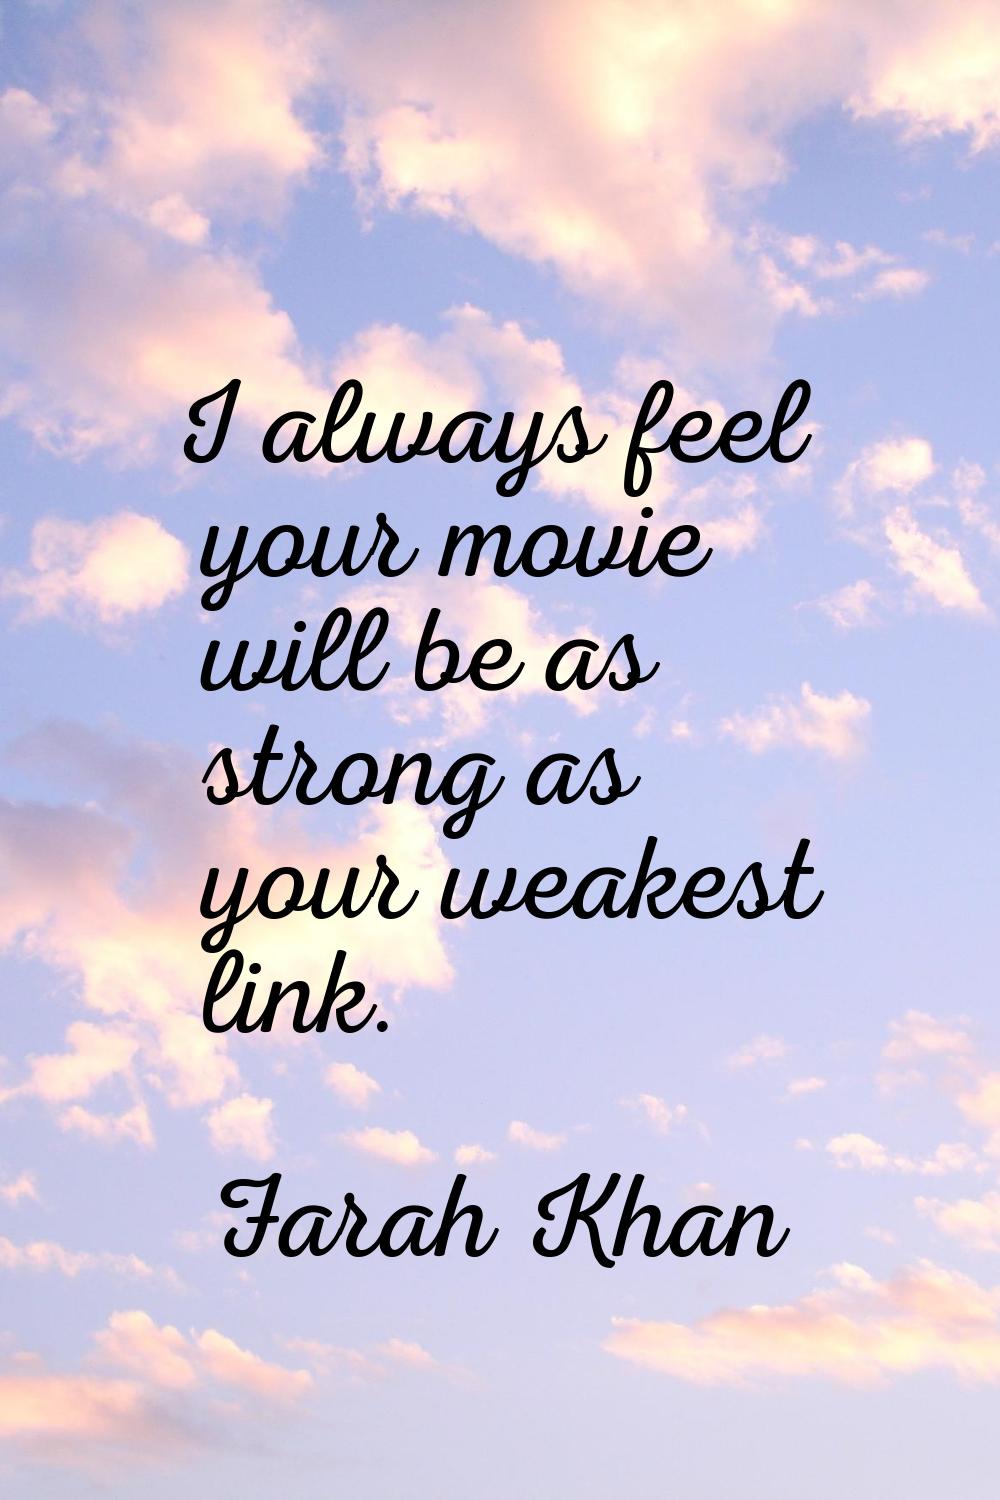 I always feel your movie will be as strong as your weakest link.